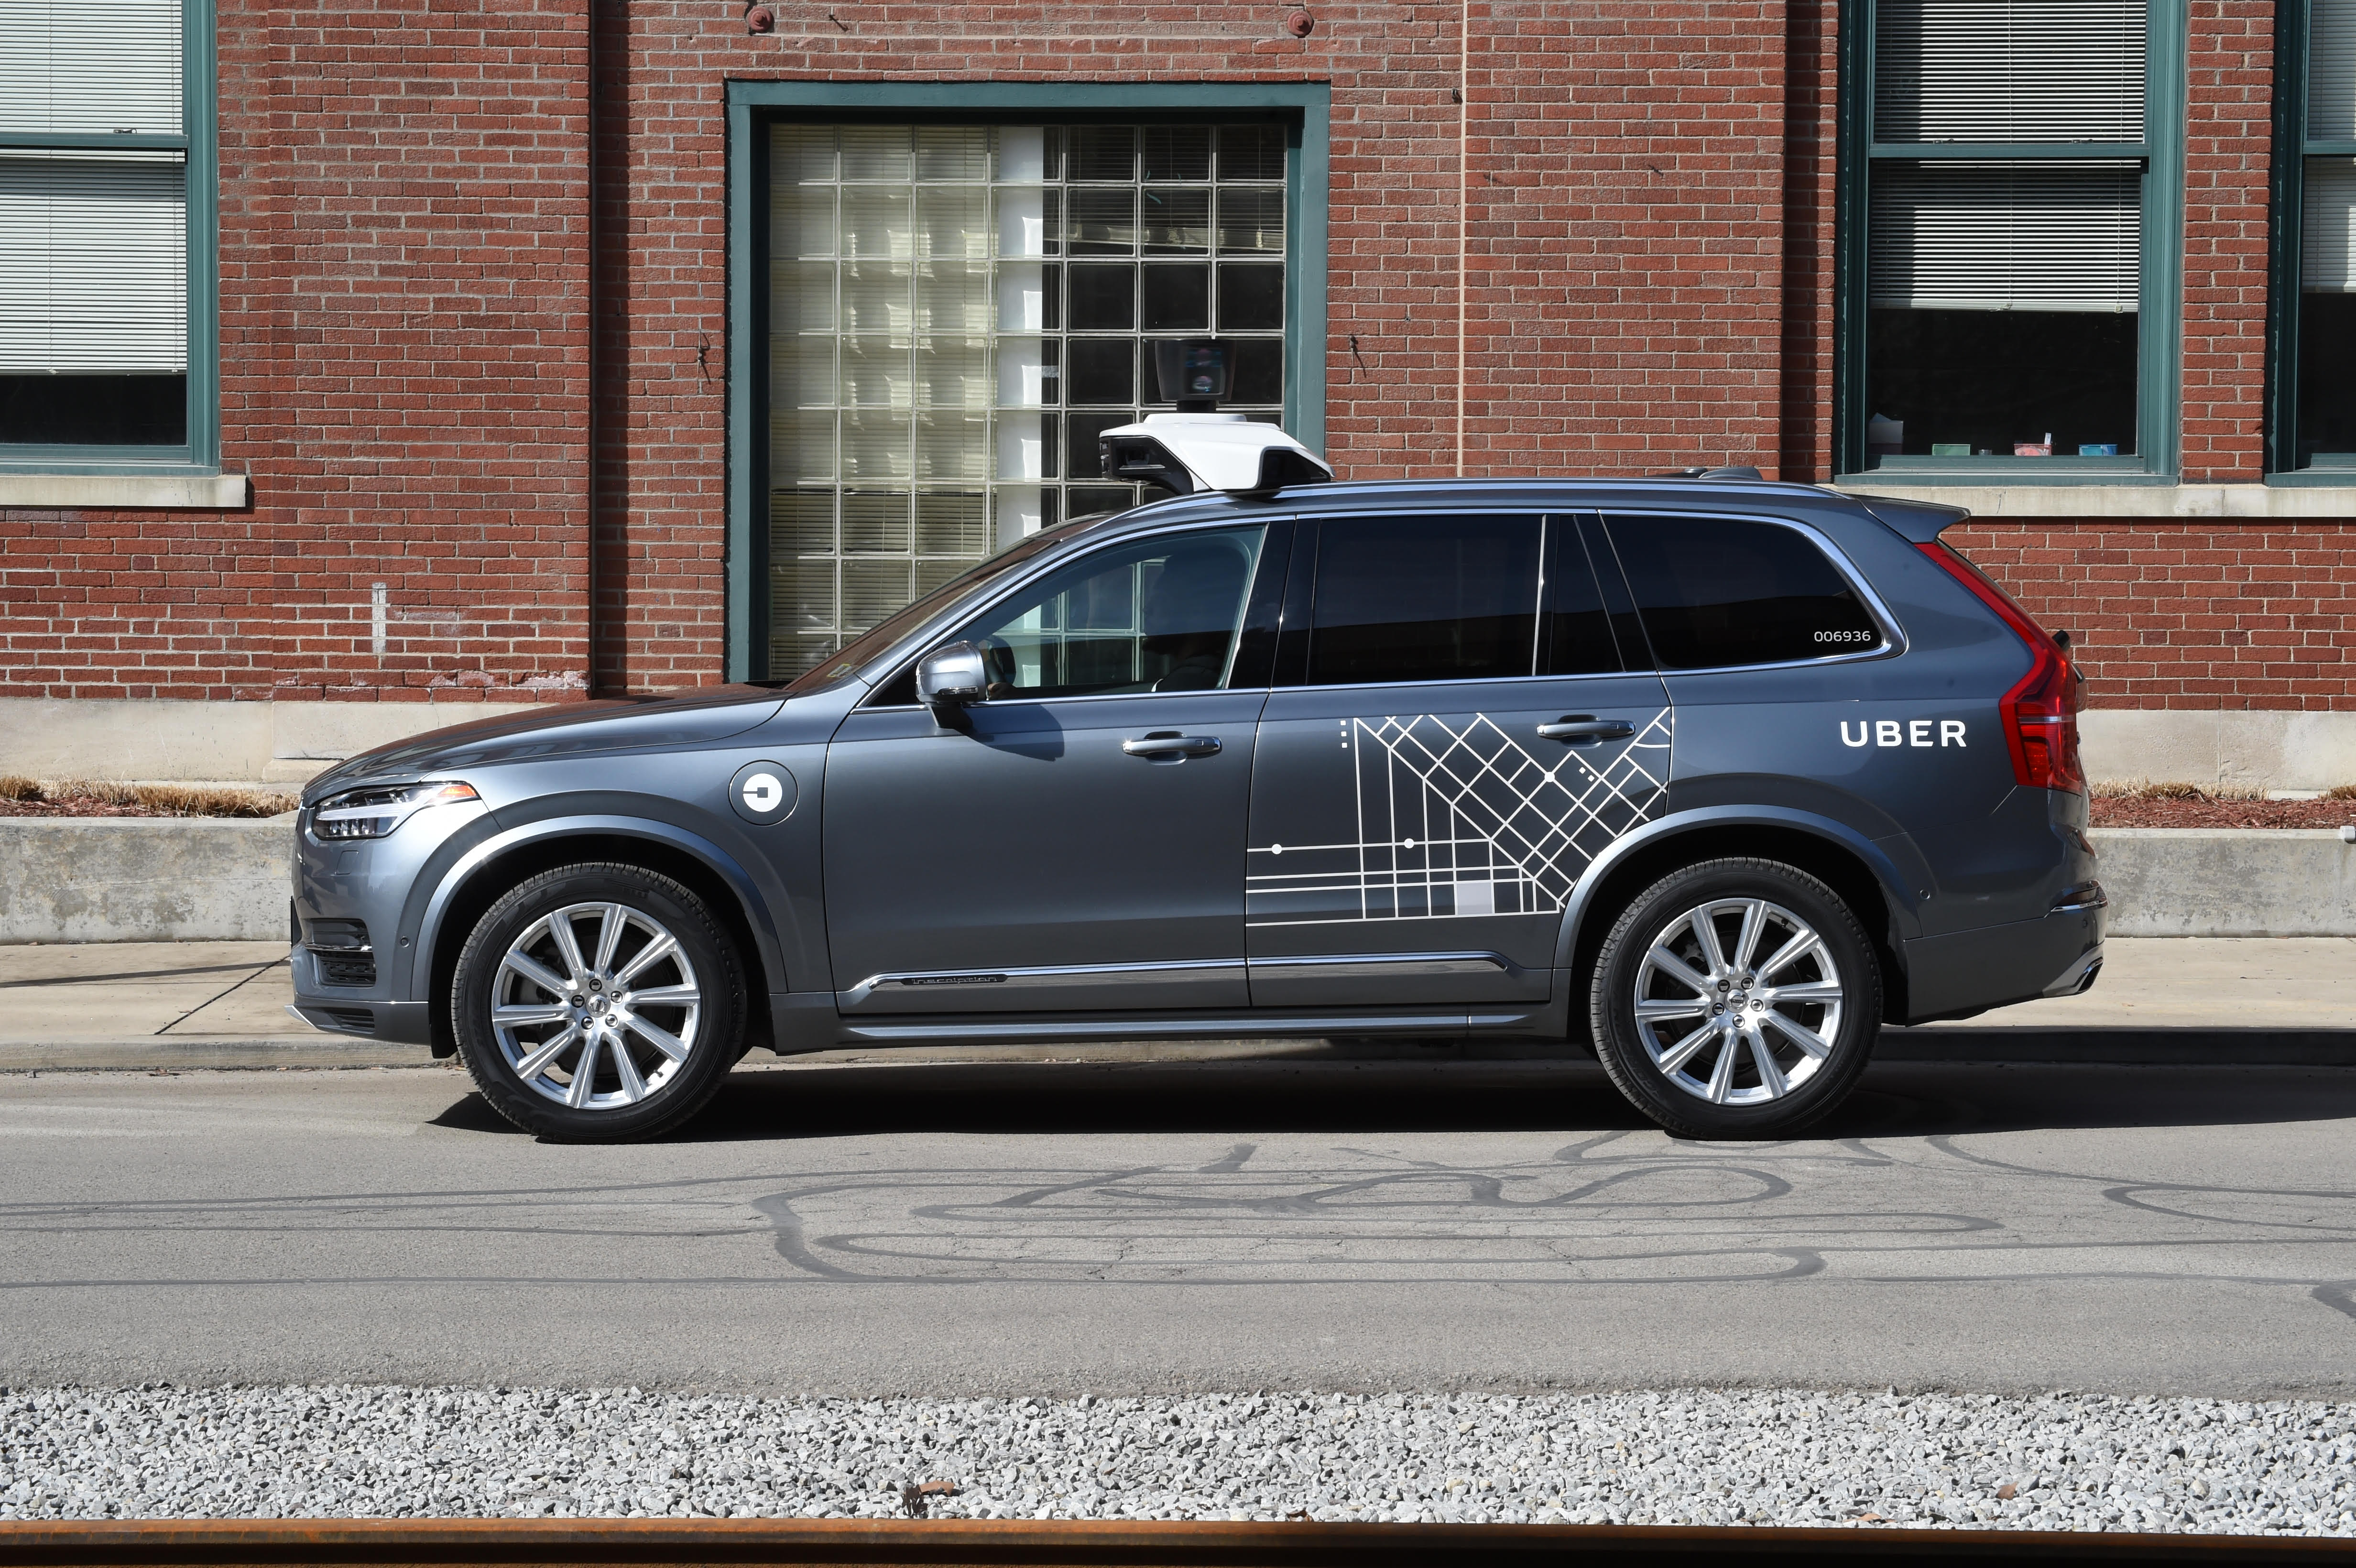 Self-Driving Uber Involved in Fatal Pedestrian Collision